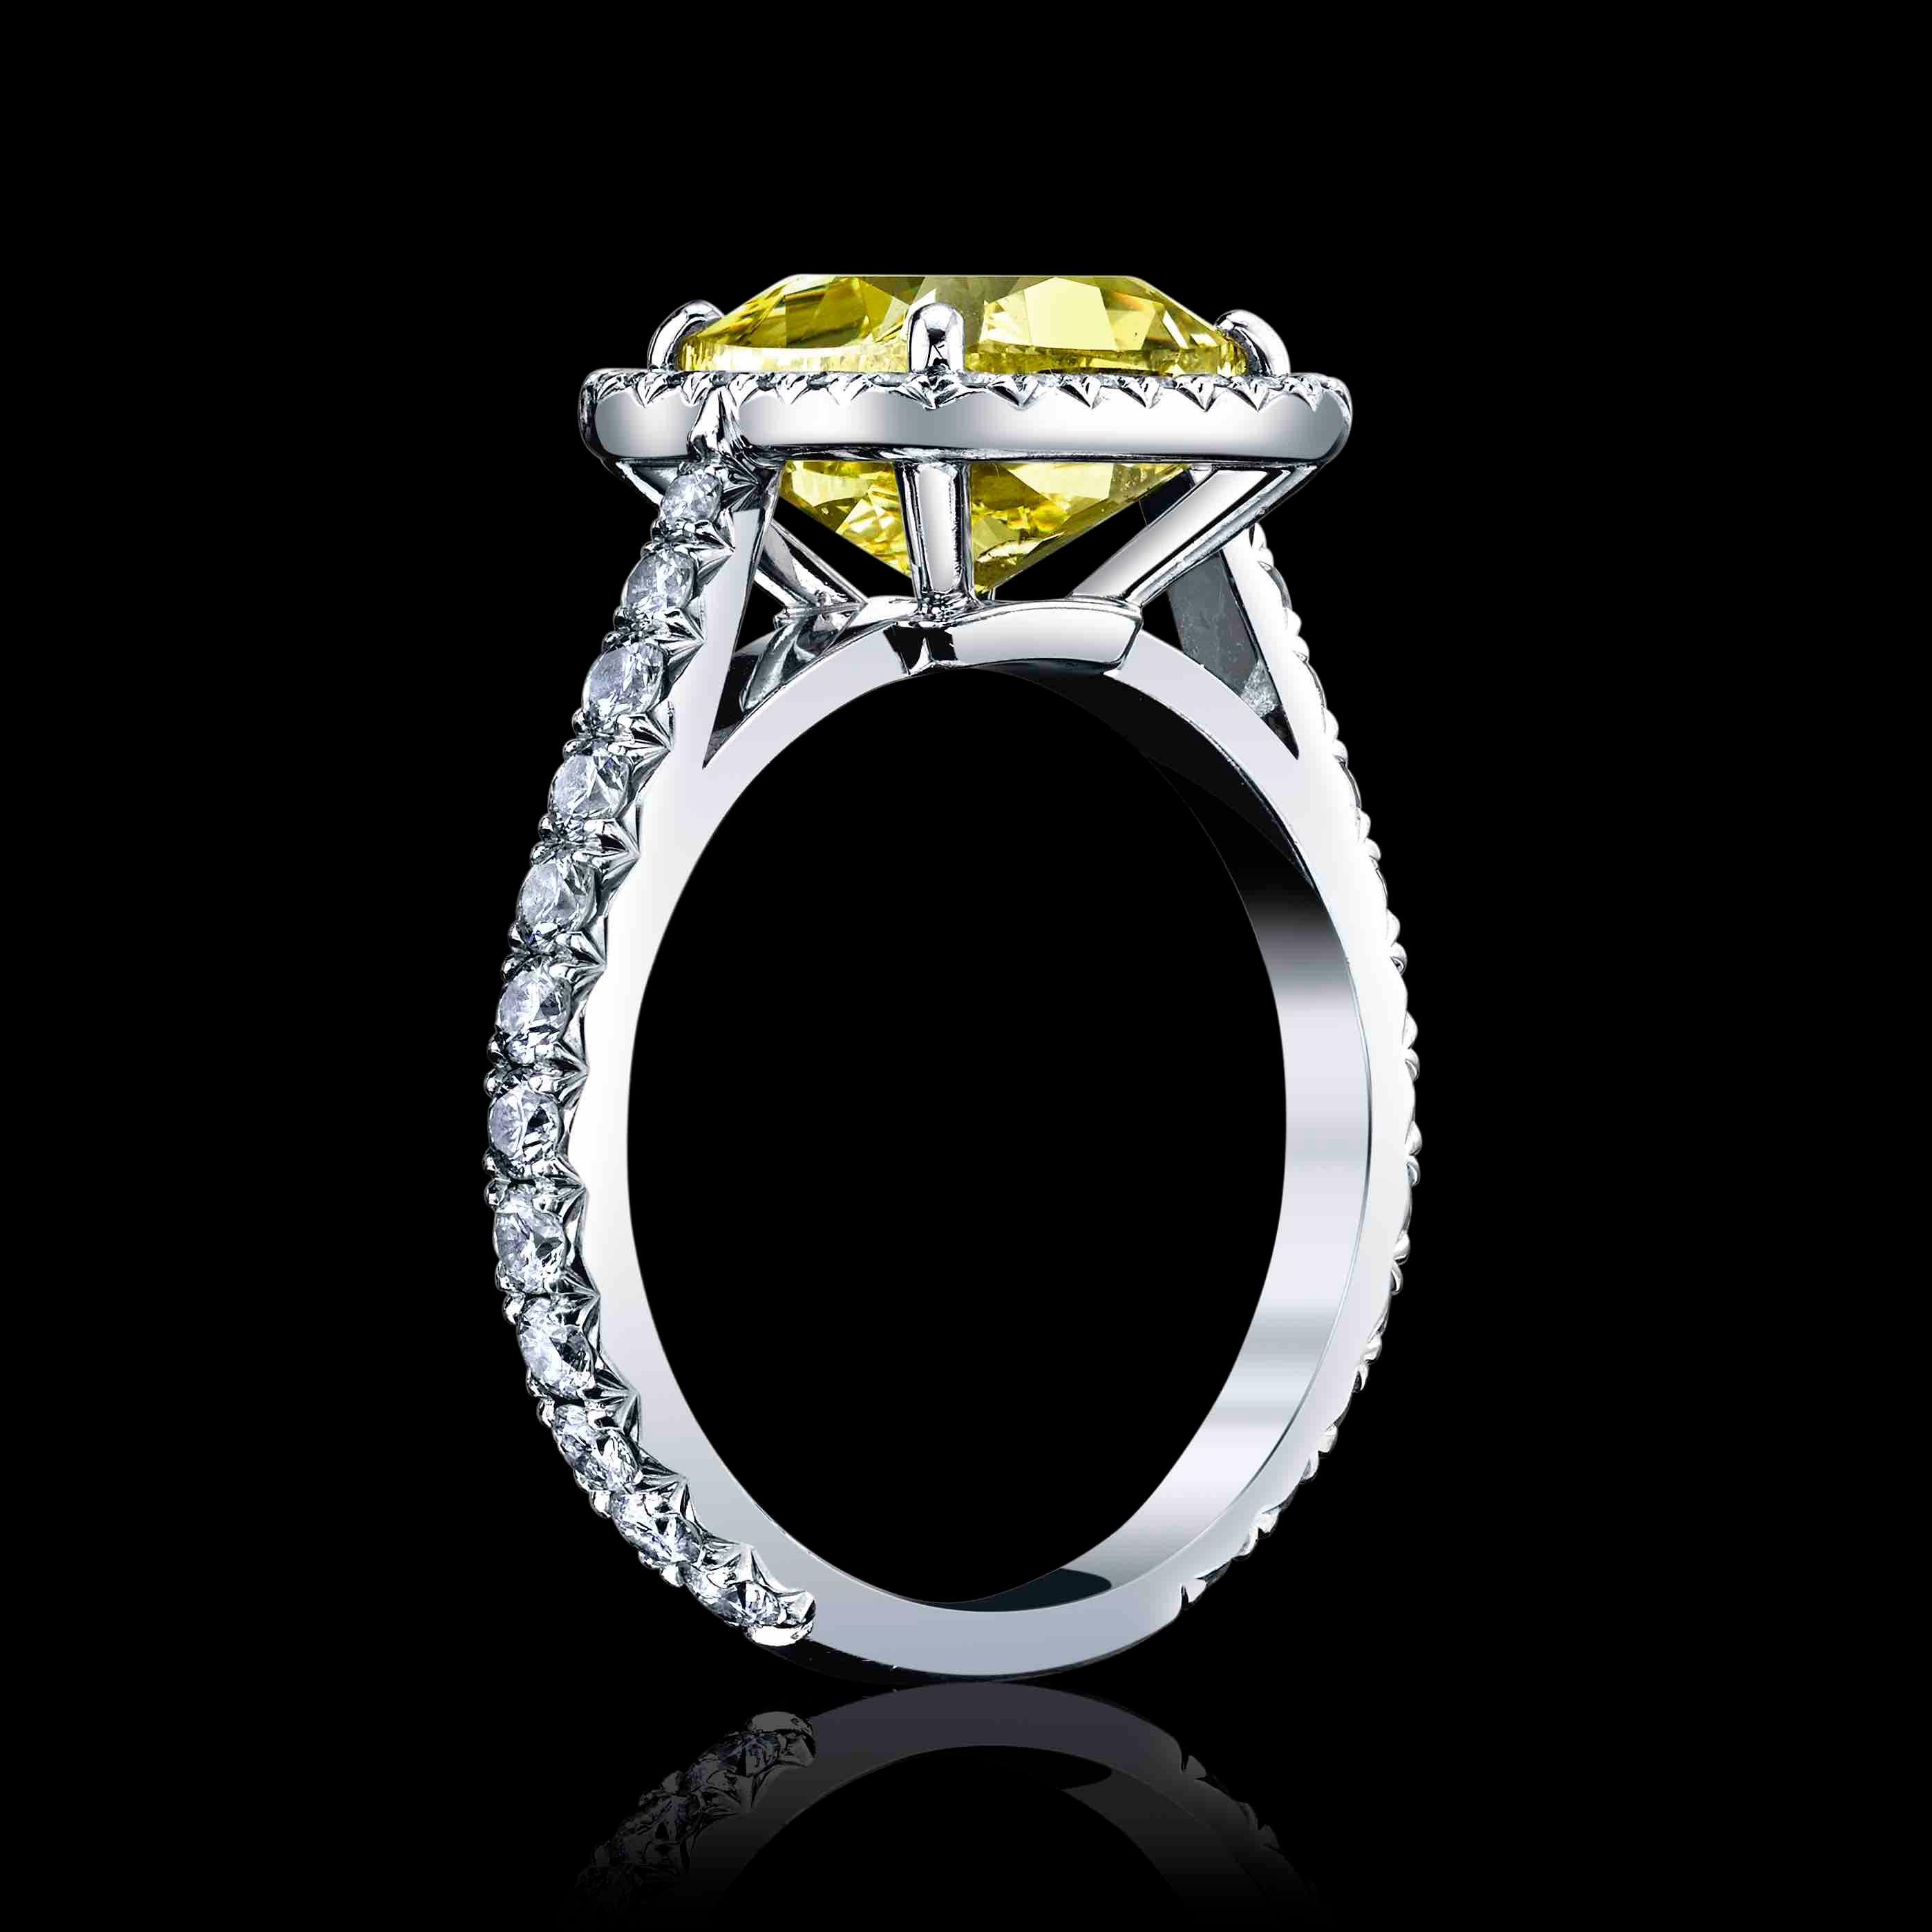 This is an original Cartier Ring with a Natural 3.02ct, Cushion Diamond, Fancy Intense Yellow, VS1 Clarity.
The Center diamond is set in Platinum with 1.00cttw melle diamonds with DE colors and VVS clarity.
The center diamond is  GIA certified